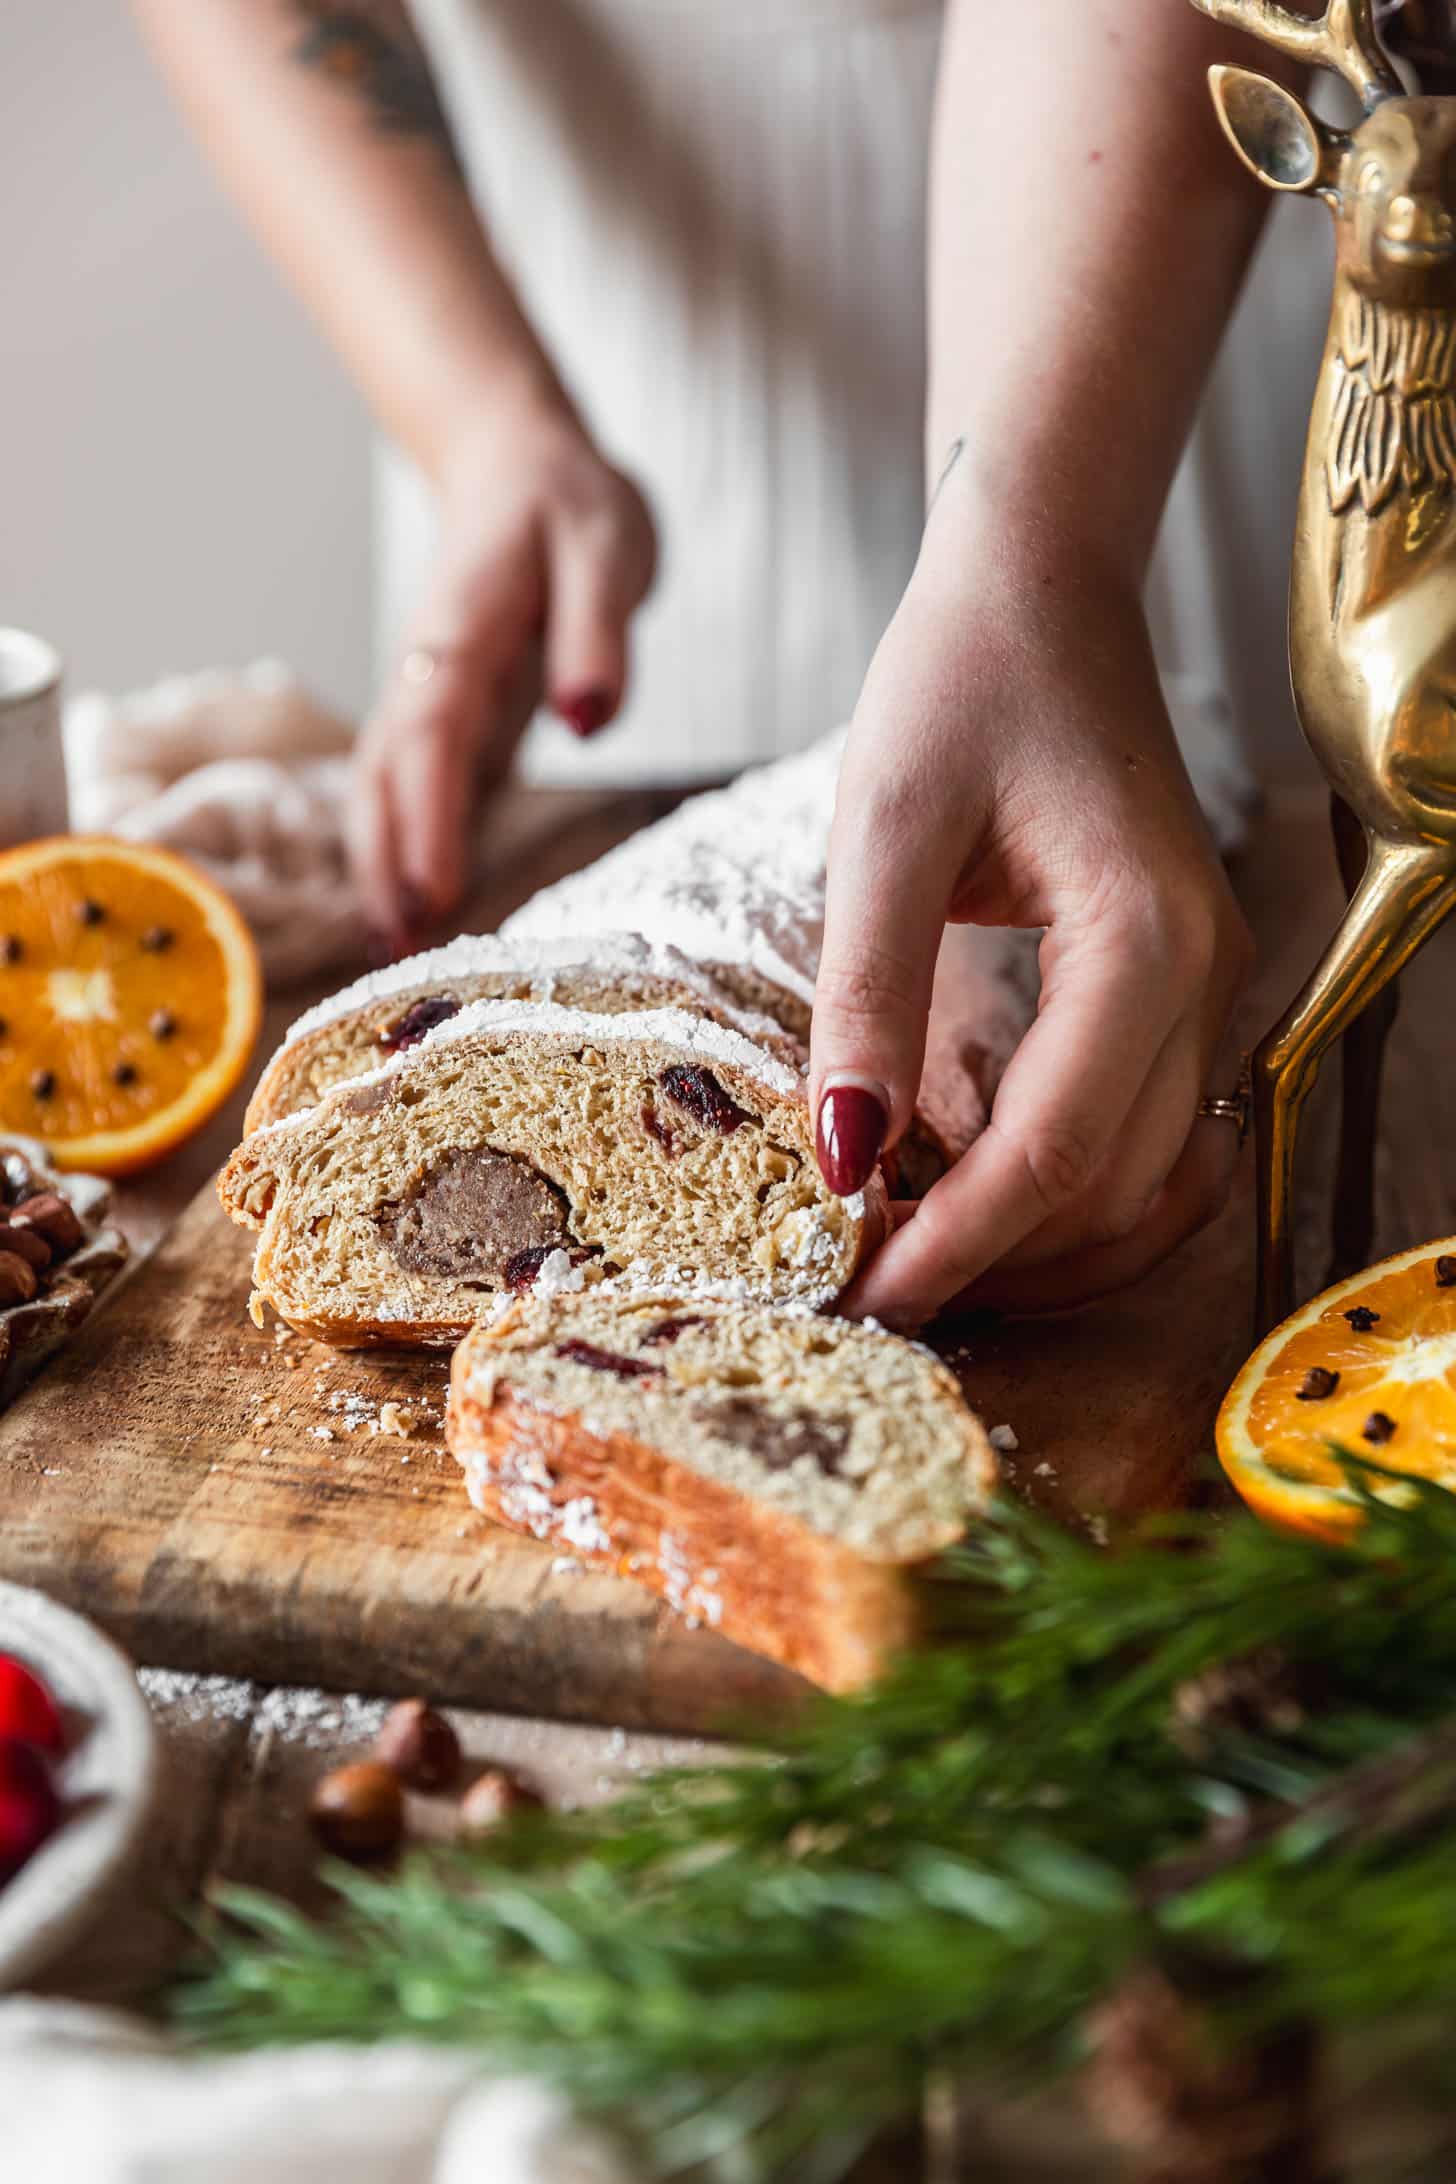 A woman in a white dress reaching for a piece of German Christmas bread on a wood board next to oranges, a gold deer, garland, and hazelnuts.